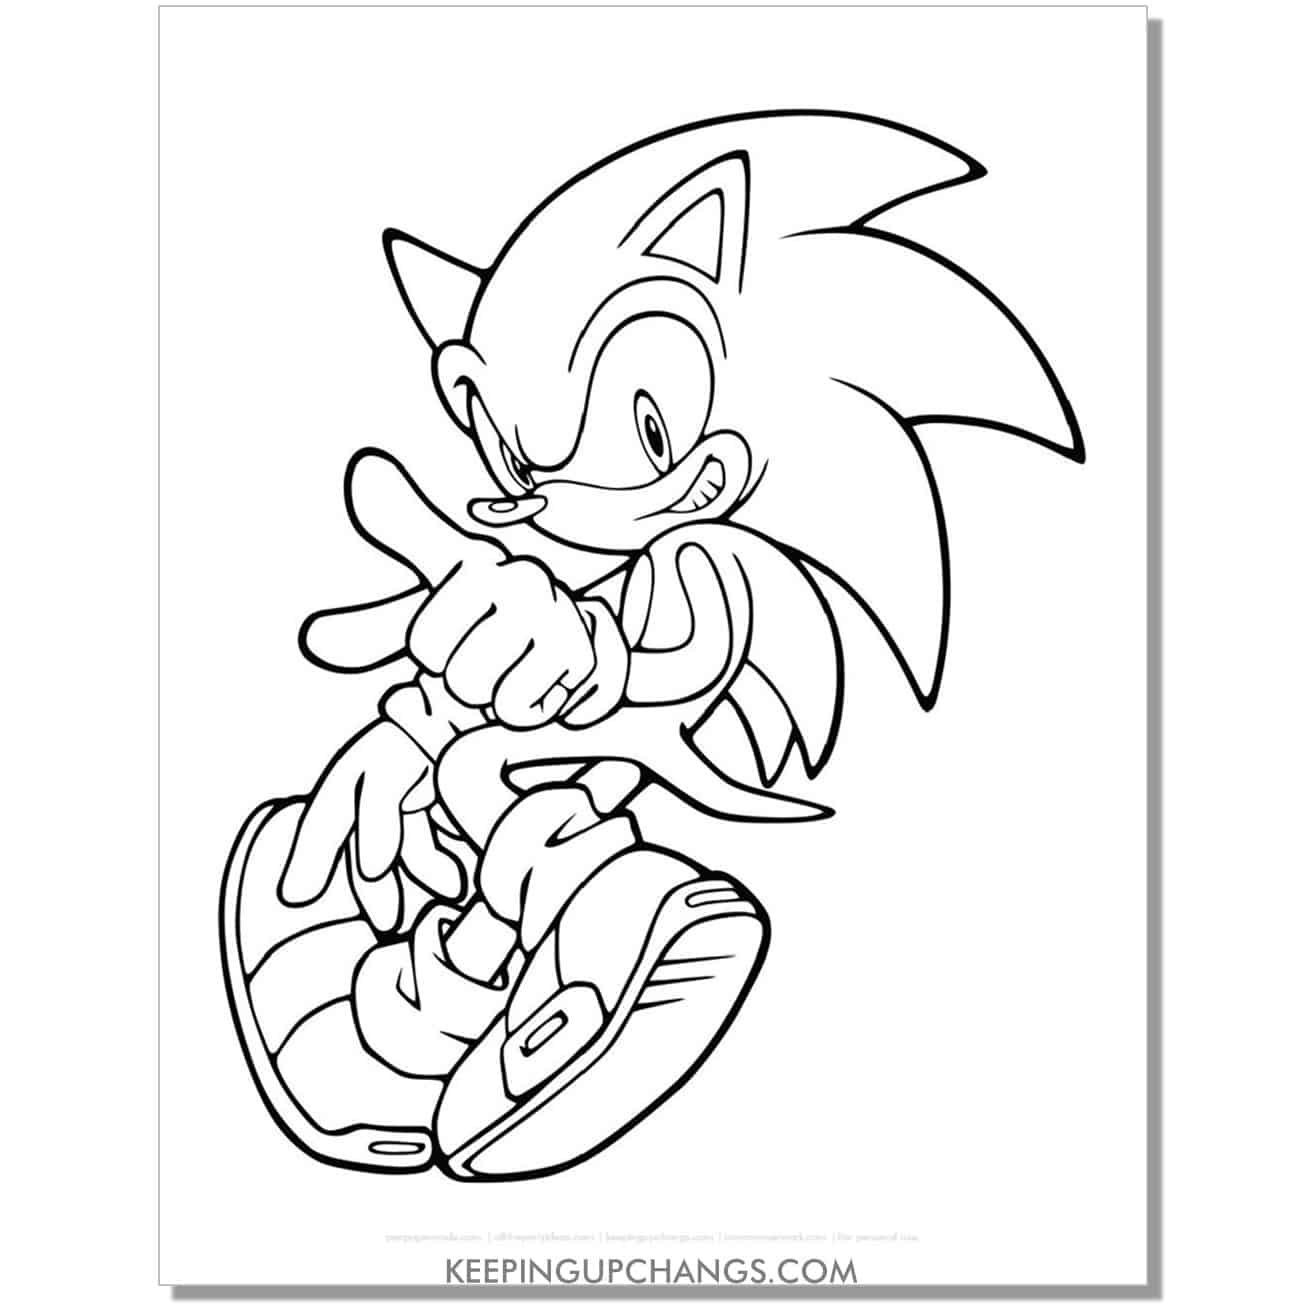 sonic walking but looking back coloring page.